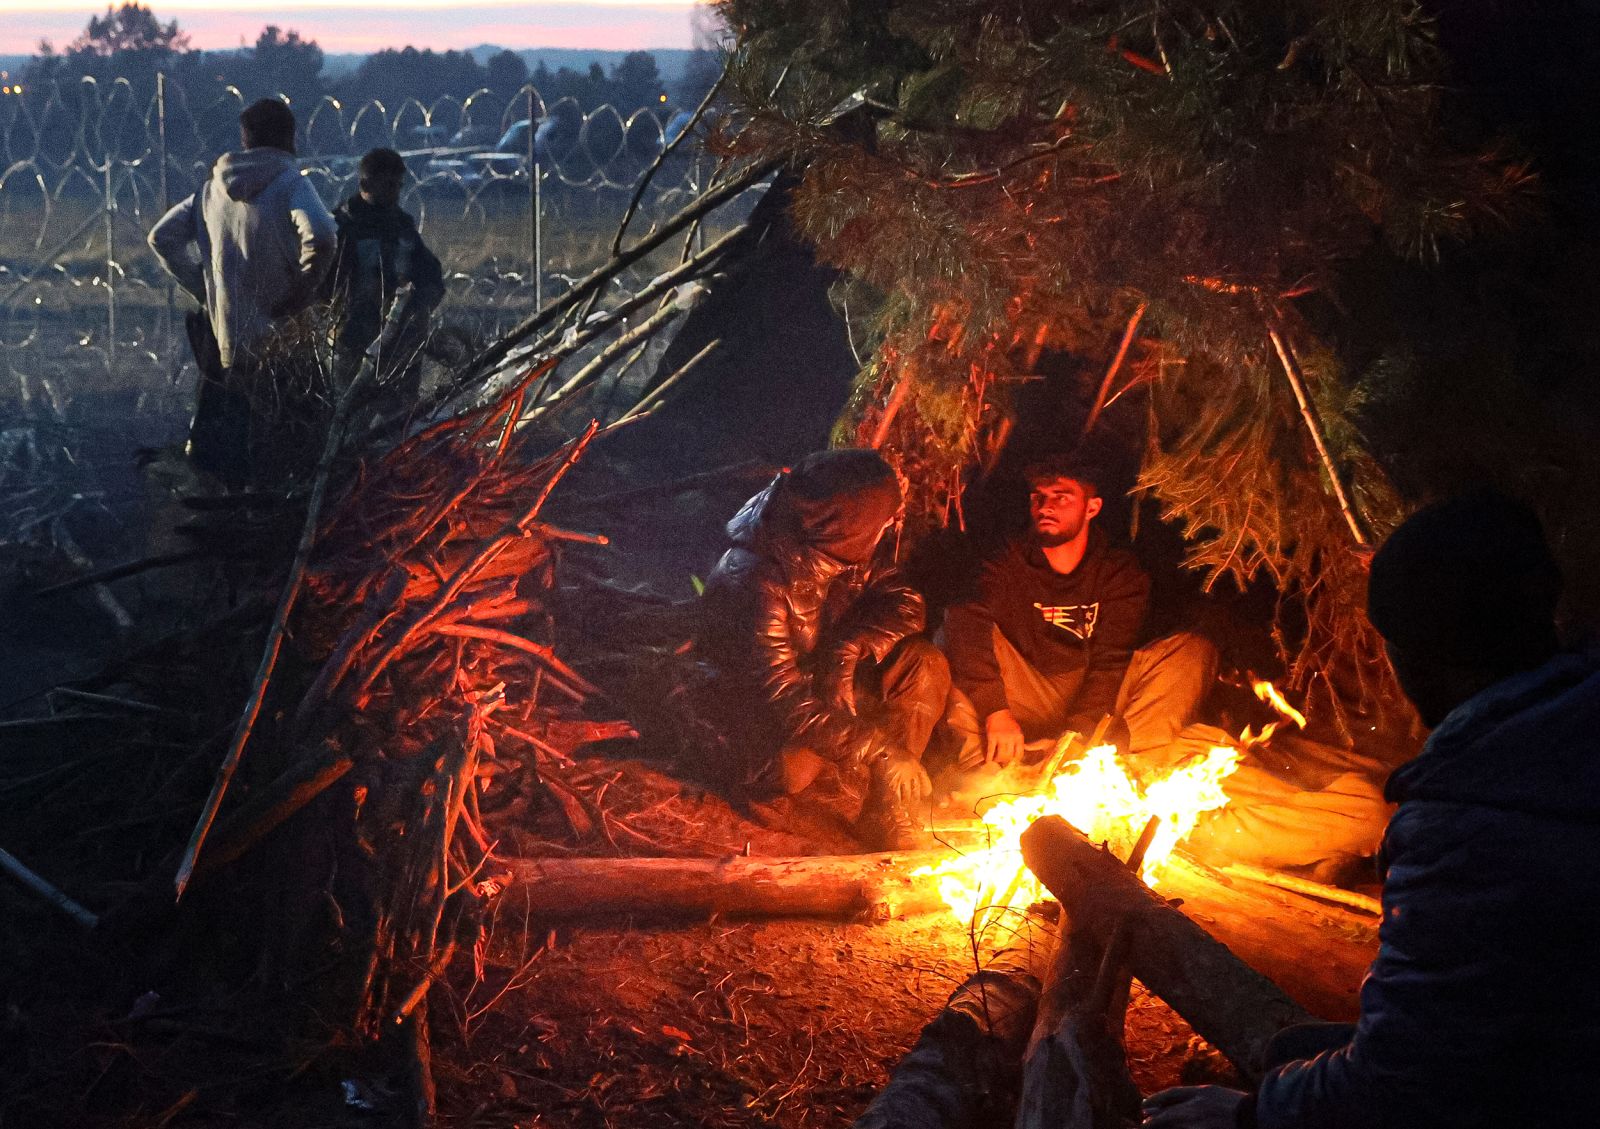 Migrants sit by a fire near the Poland-Belarus border on Wednesday, November 10. 